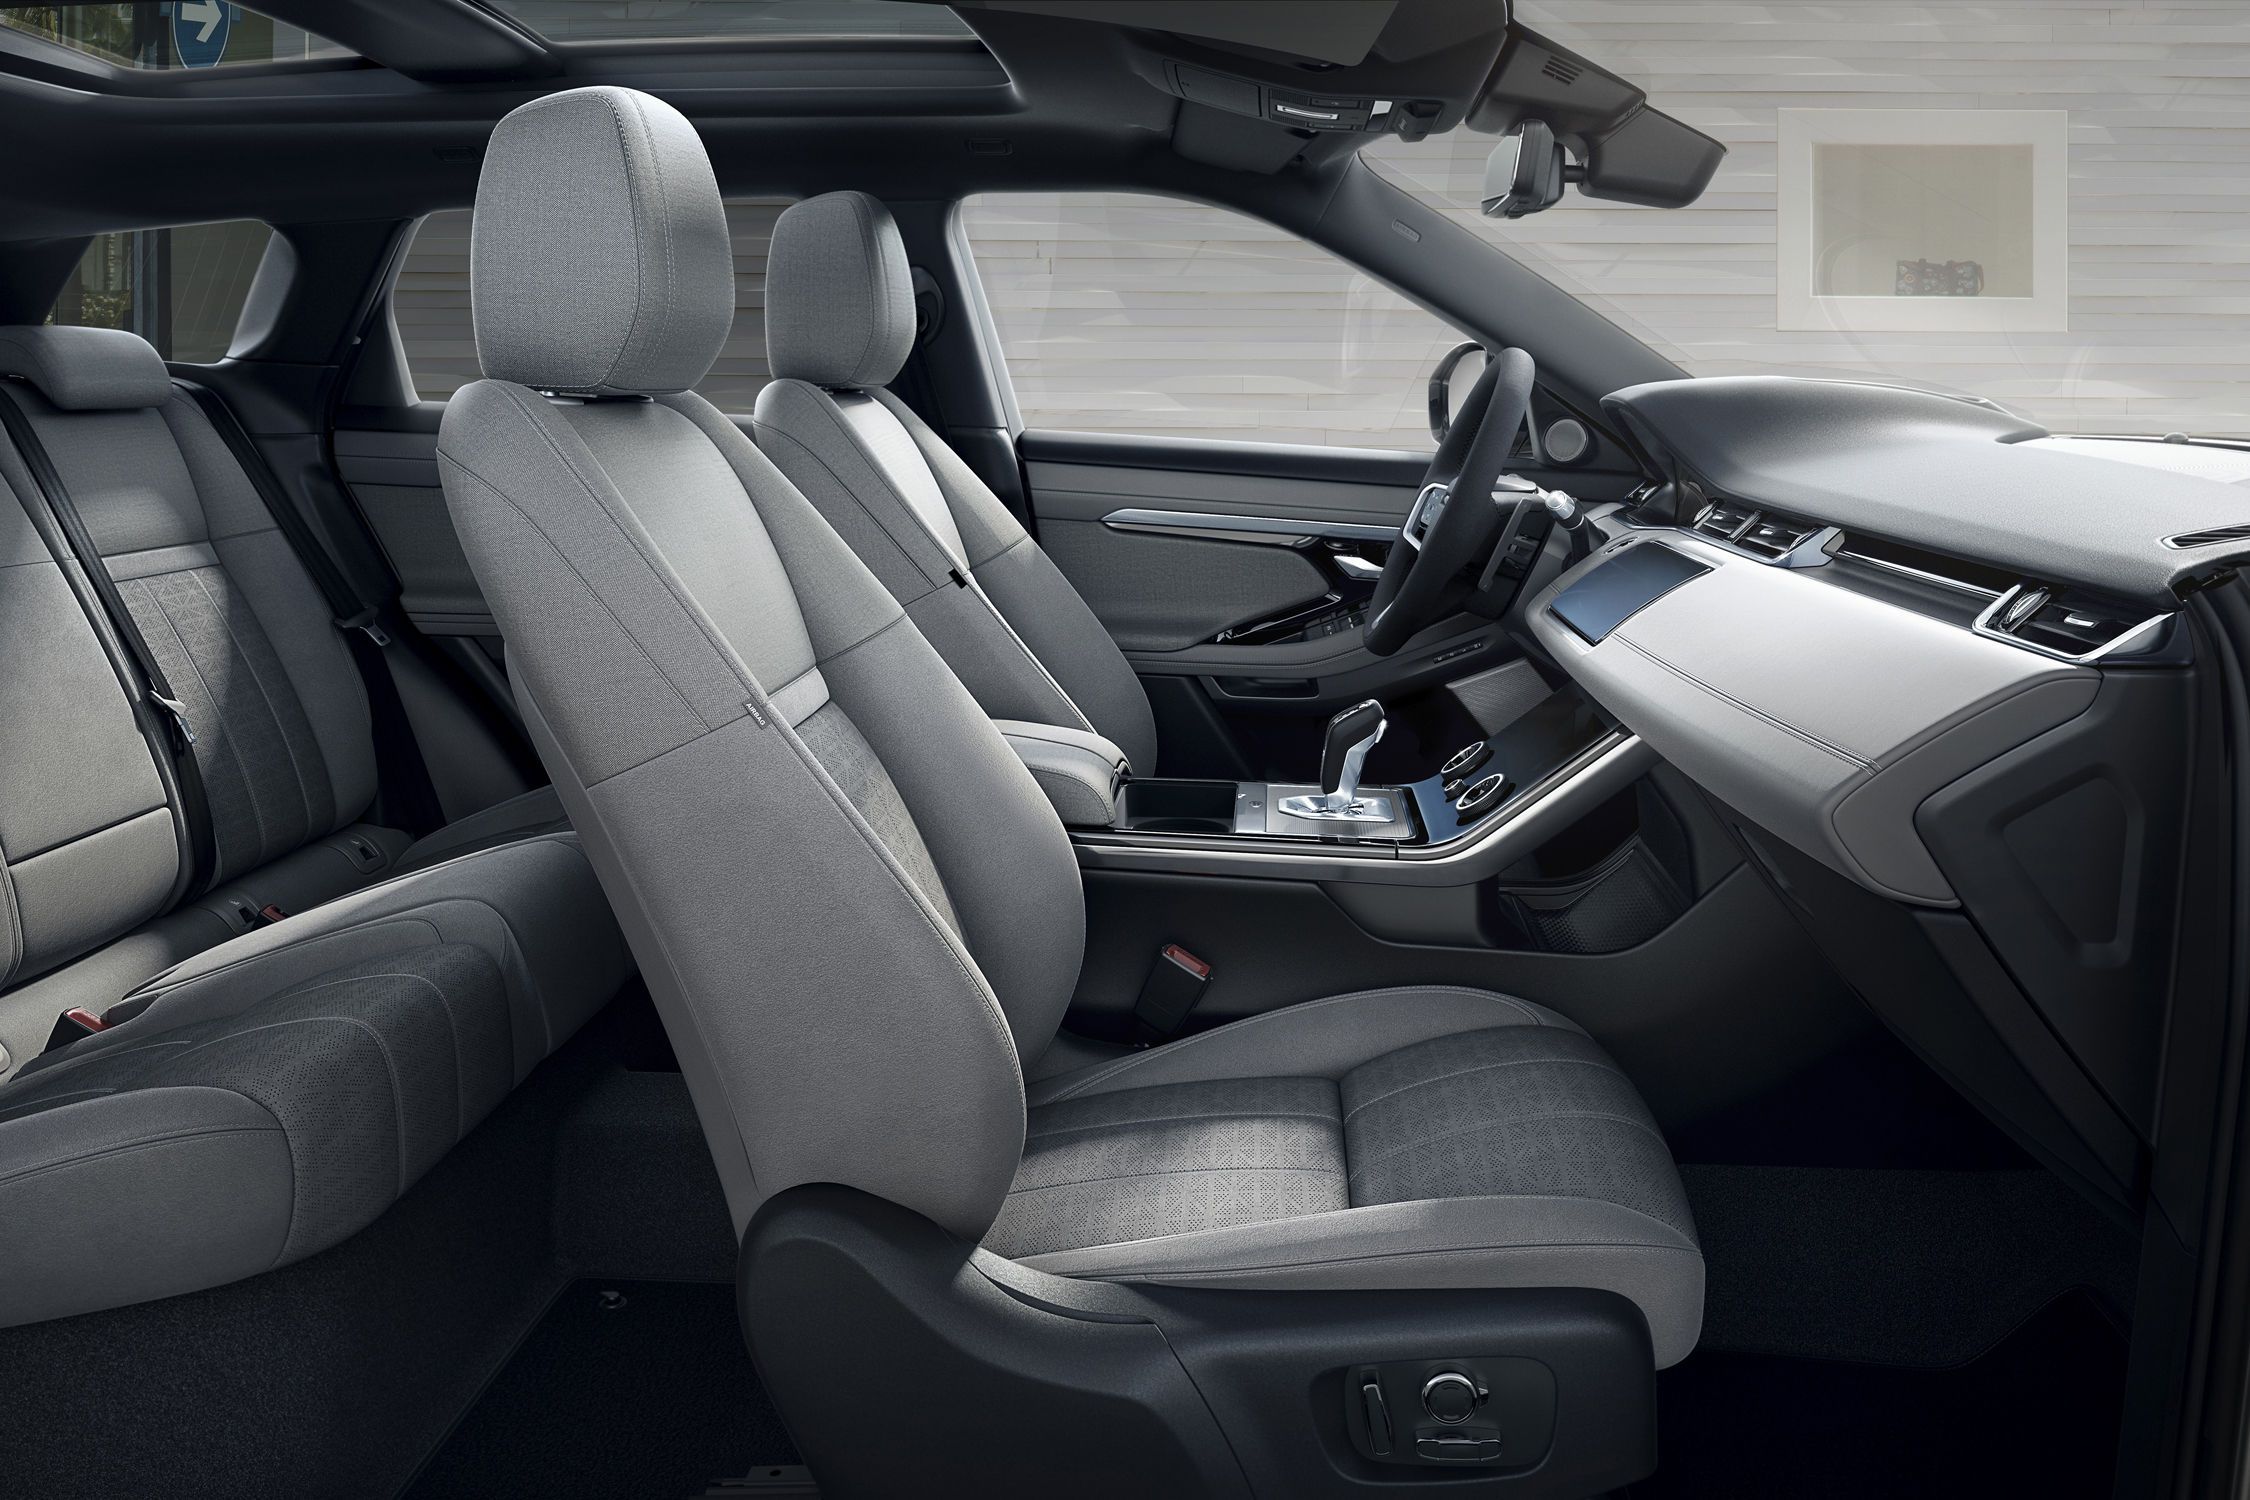 The Range Rover Evoque offers luxurious trims.